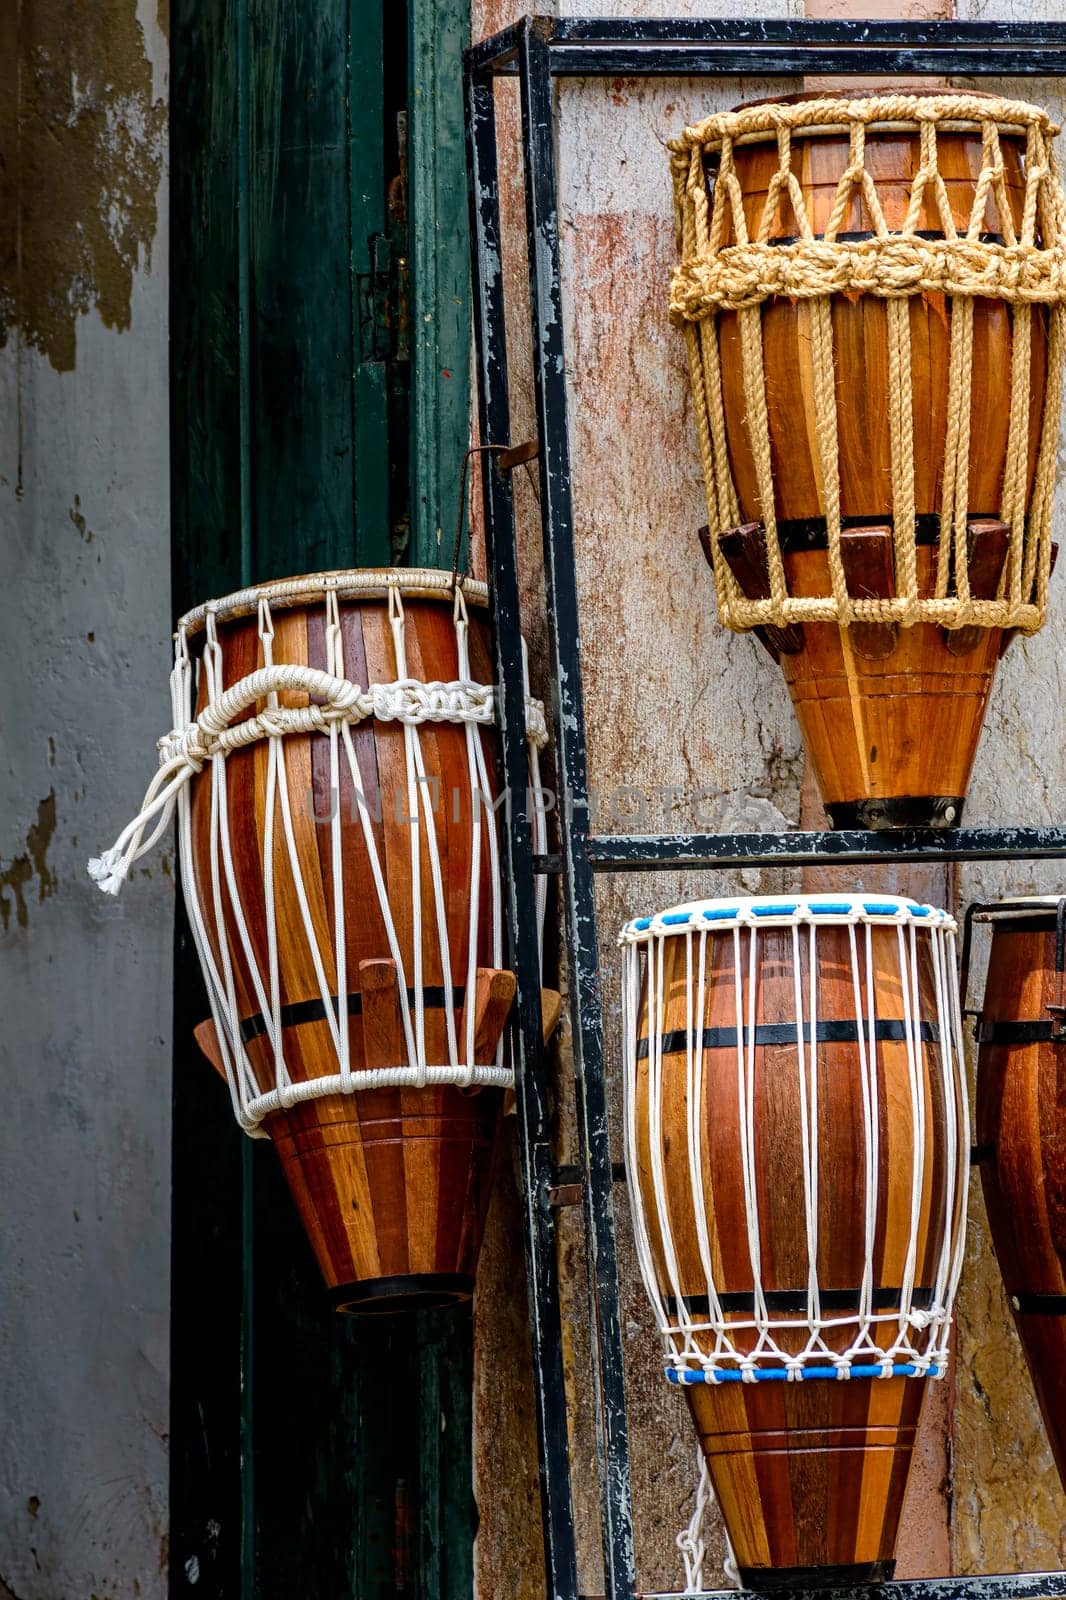 Atabaques displayed for sale in a musical instrument shop in Salvador in Bahia